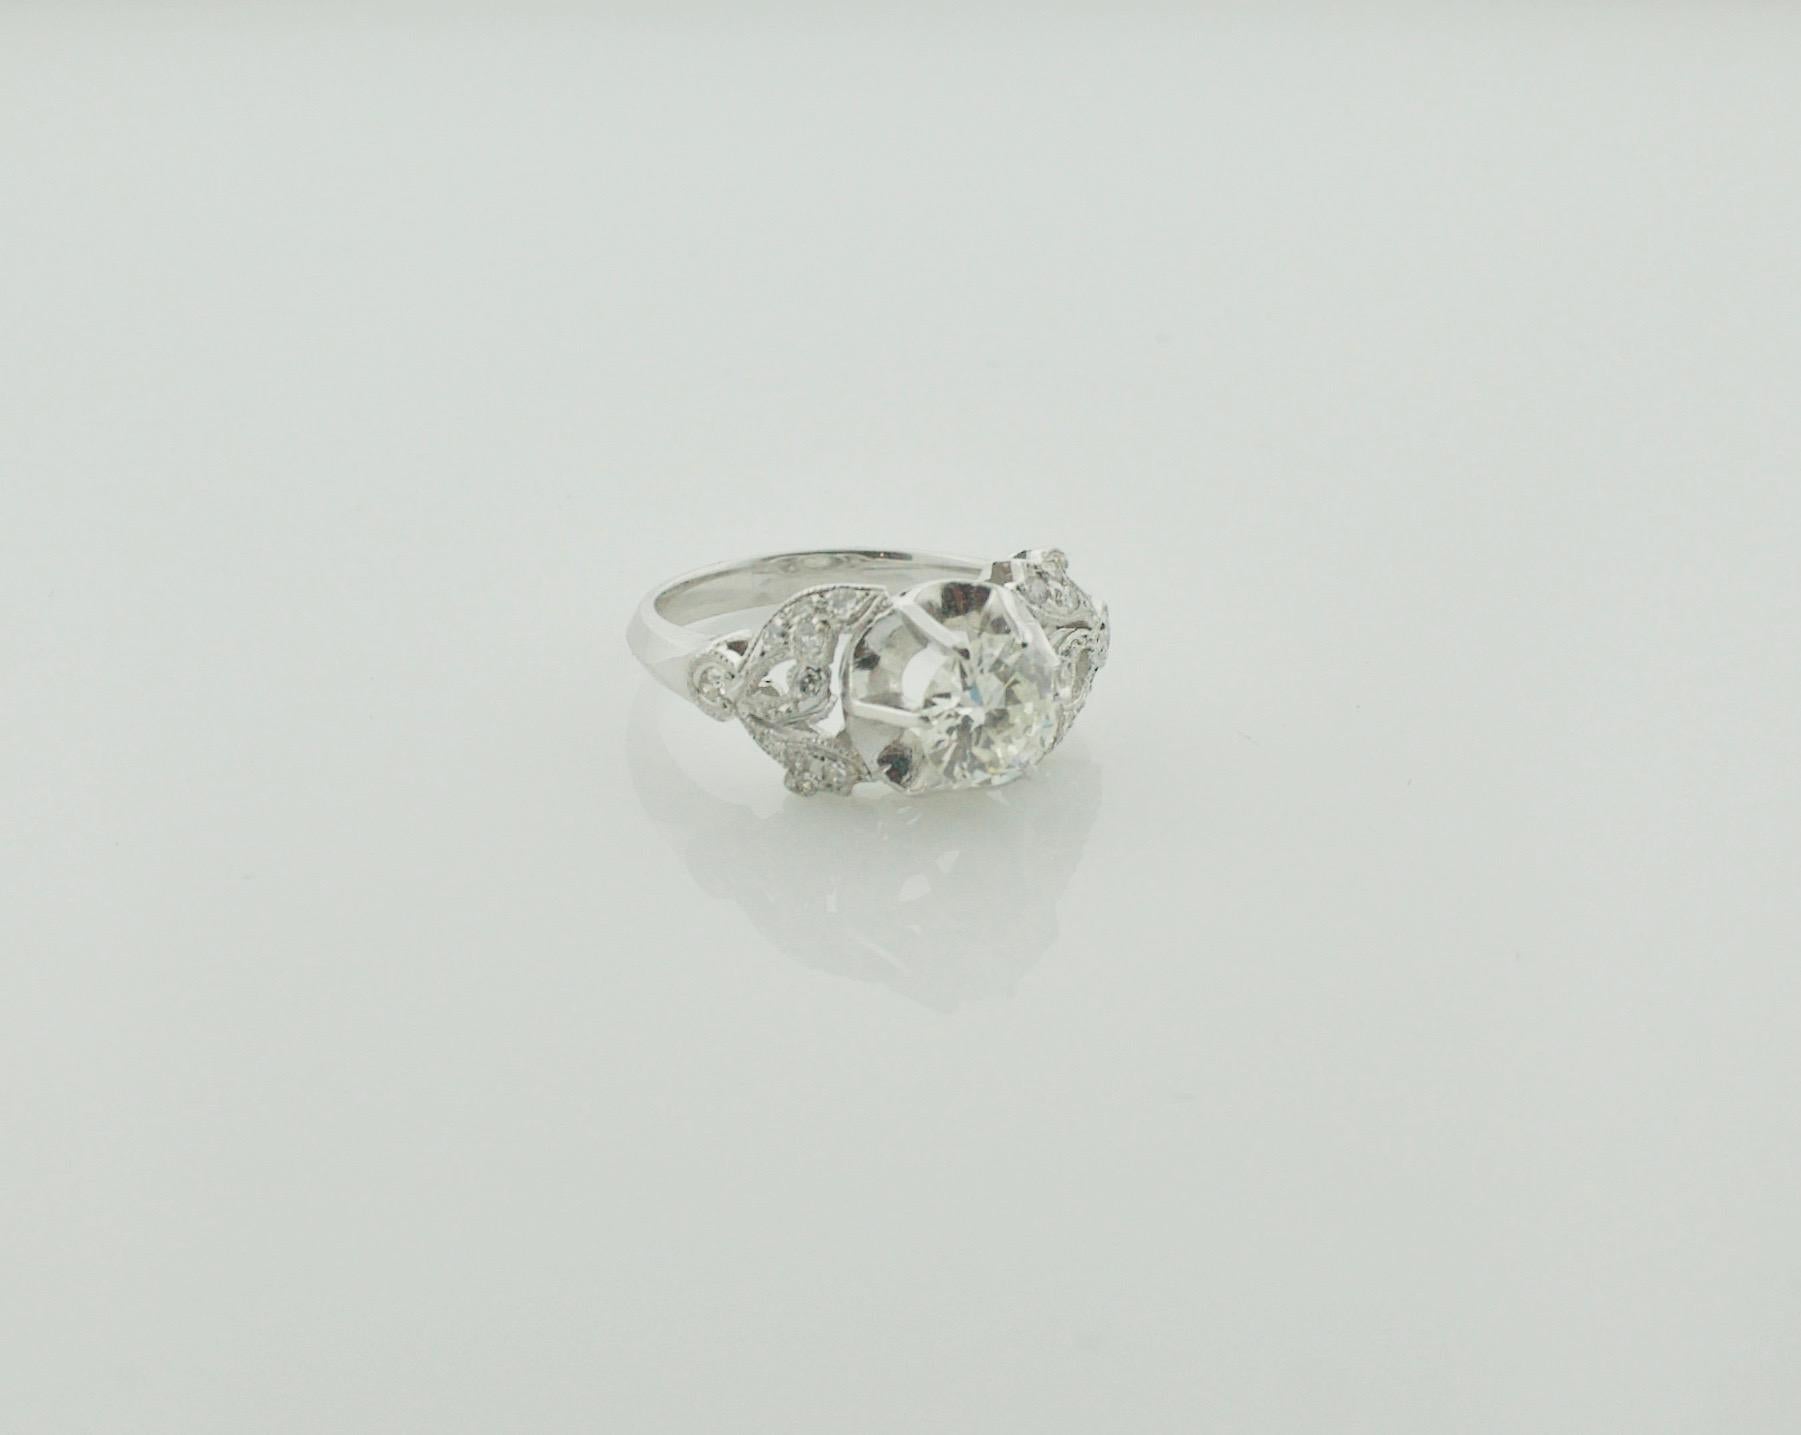 Art Deco Diamond Platinum Solitaire Ring Circa 1930's
One Old European Cut diamond Weighing .87 [K SI1]
18 Round Cut Diamonds Weighing .35 Carats Approximately 